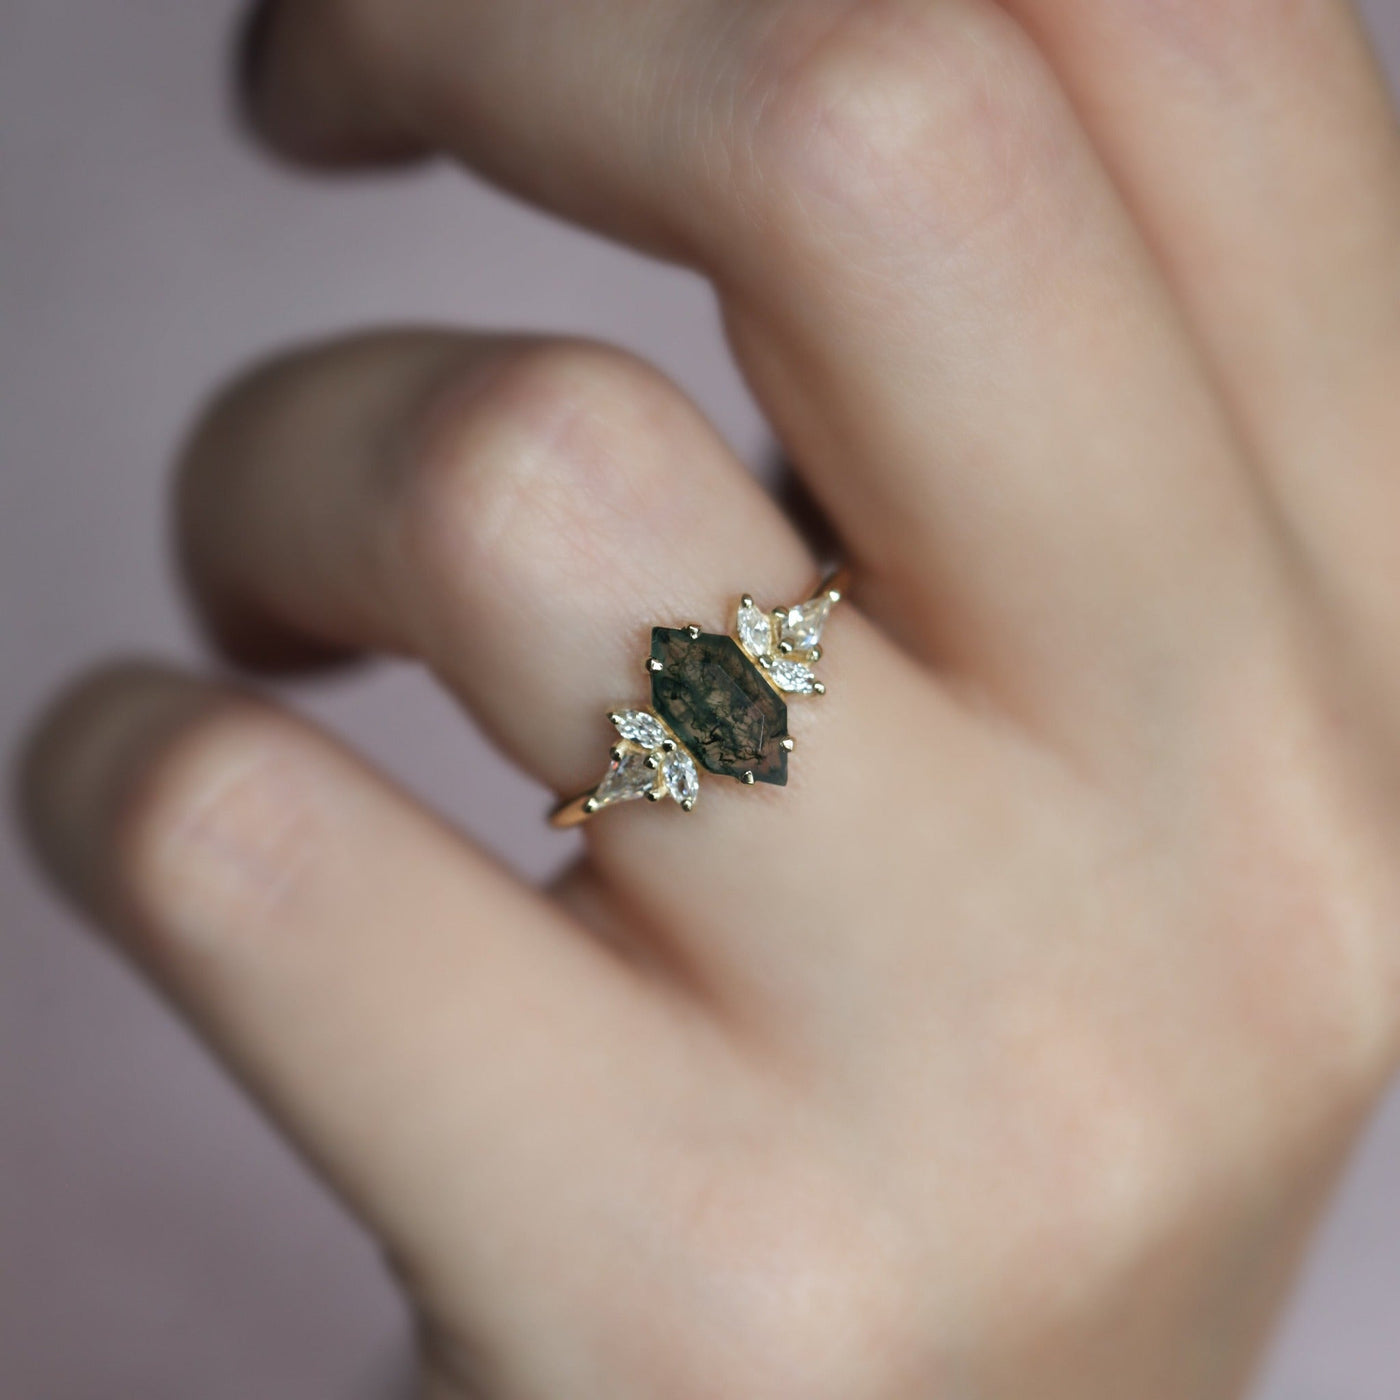 Hexagon Moss Agate Ring with Accent Marquise-Cut and Kite-Cut White Diamonds